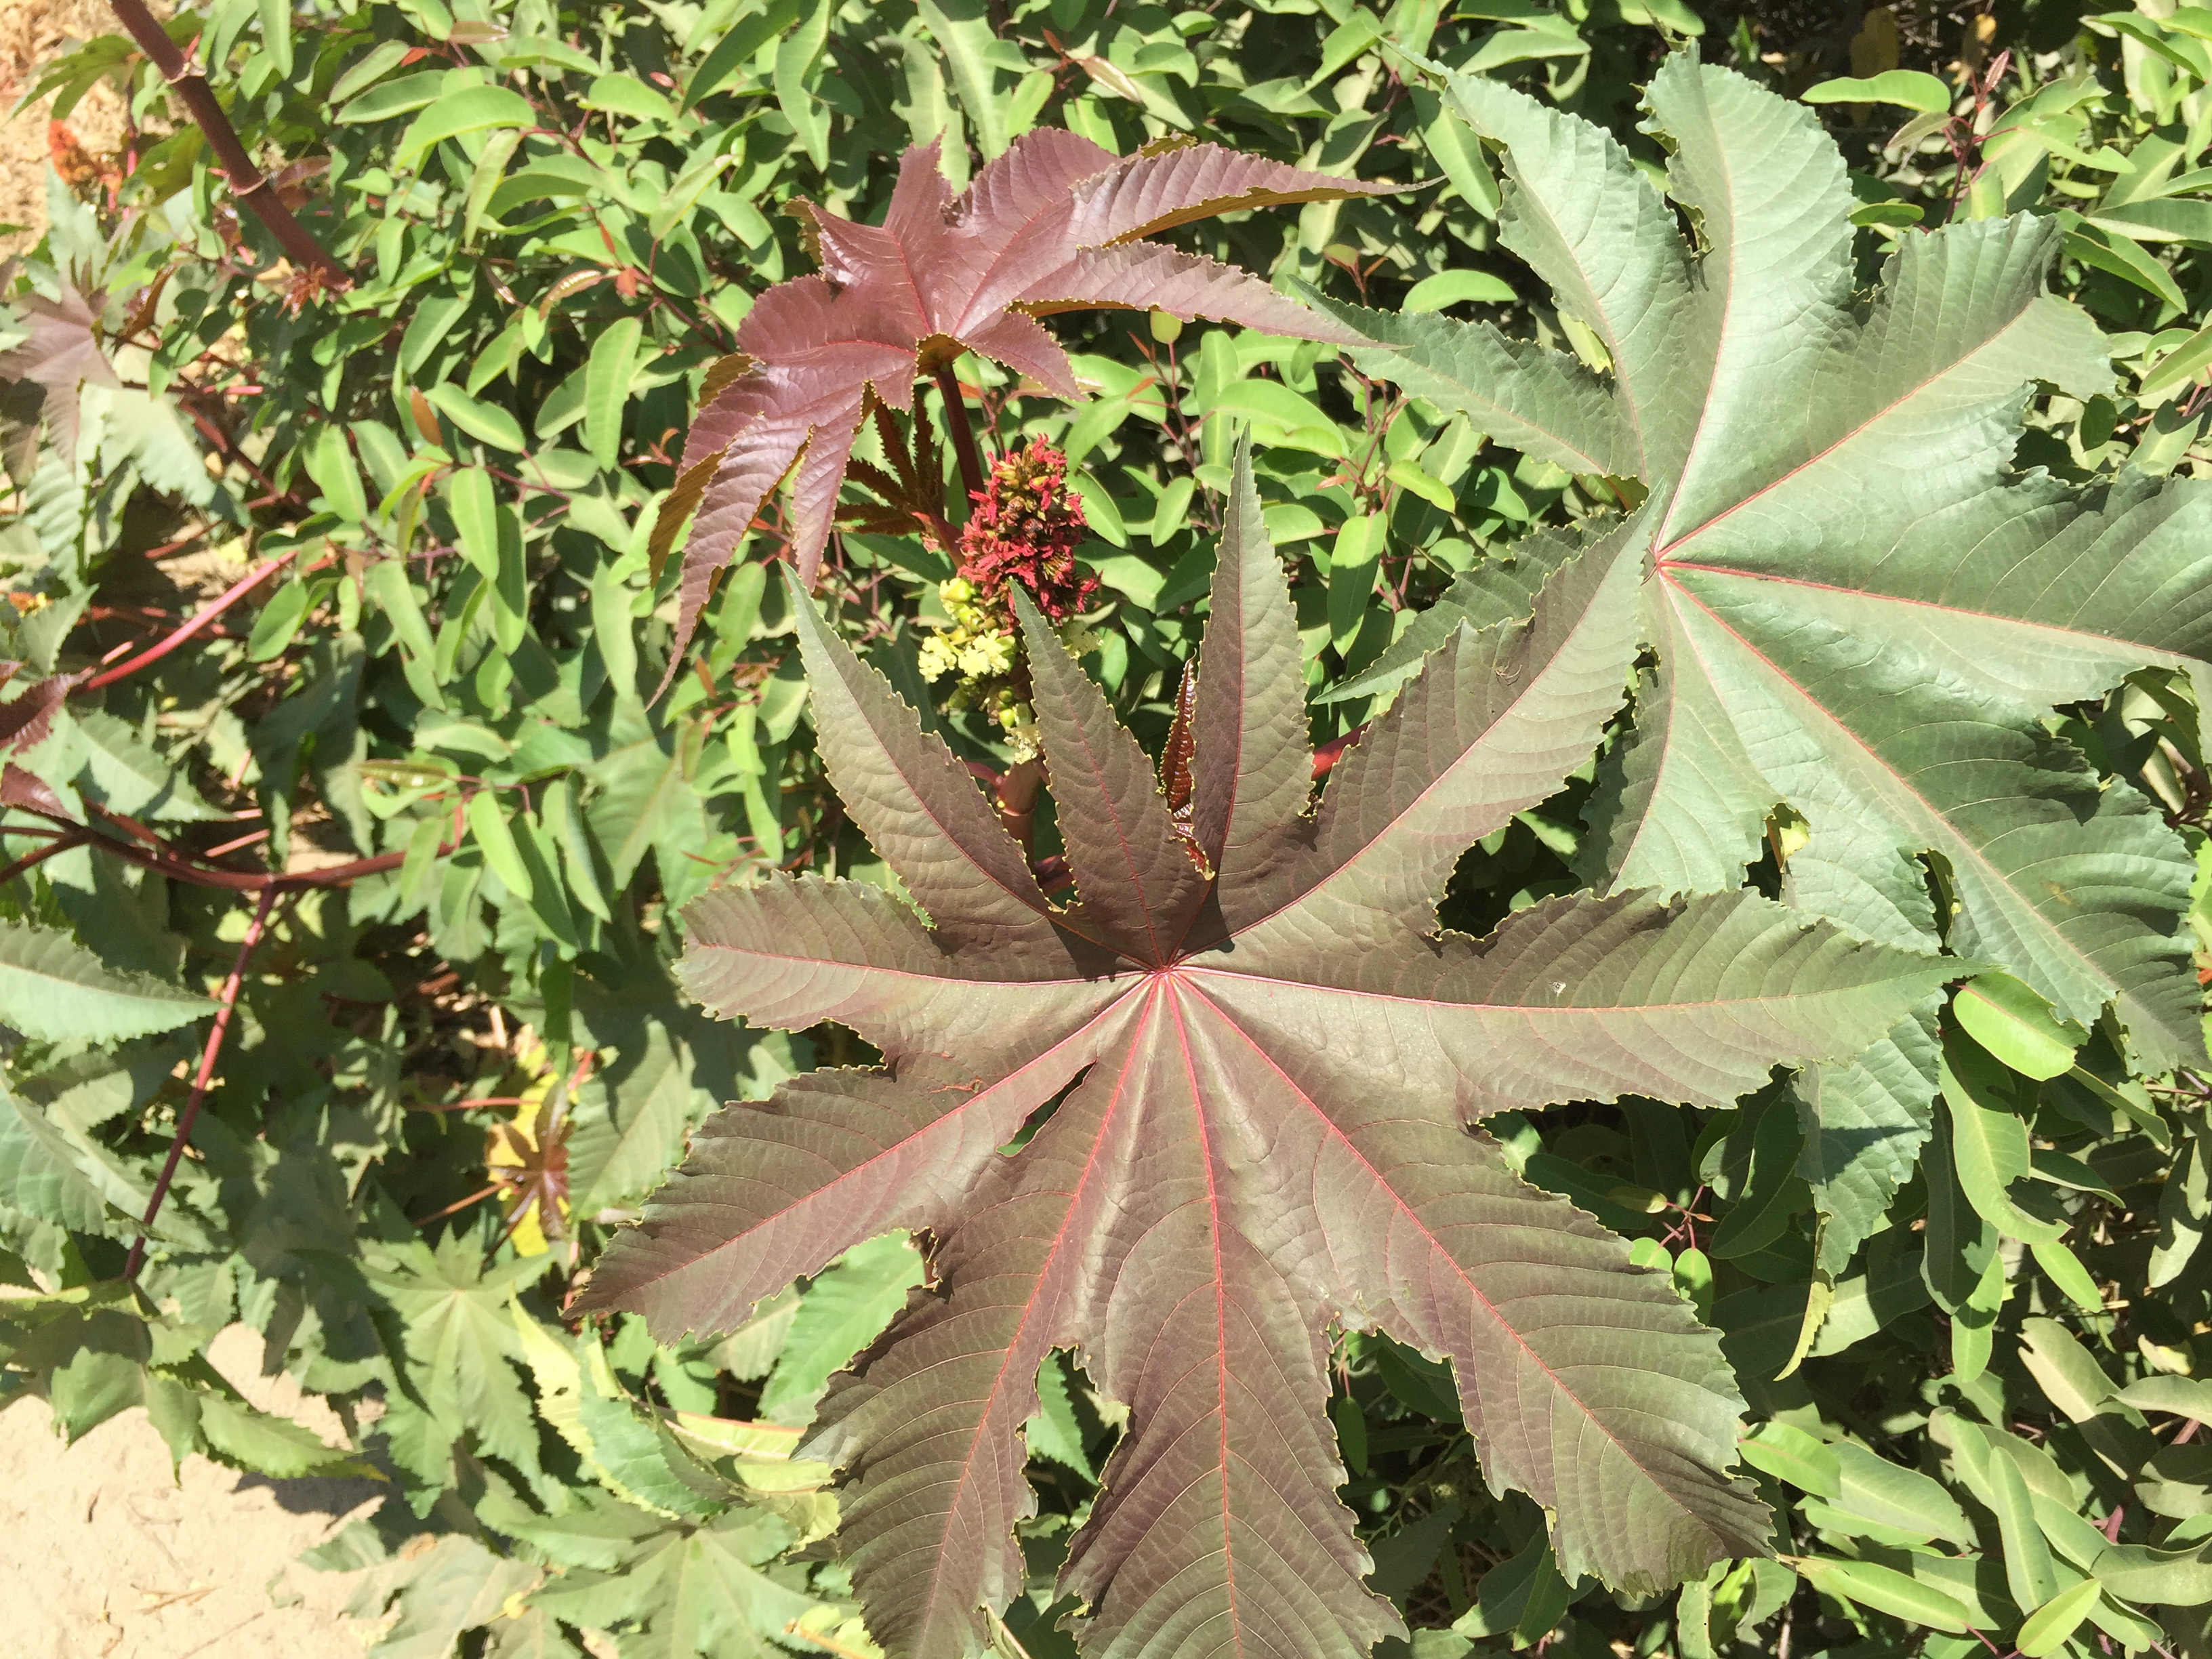 Mystery plant 3